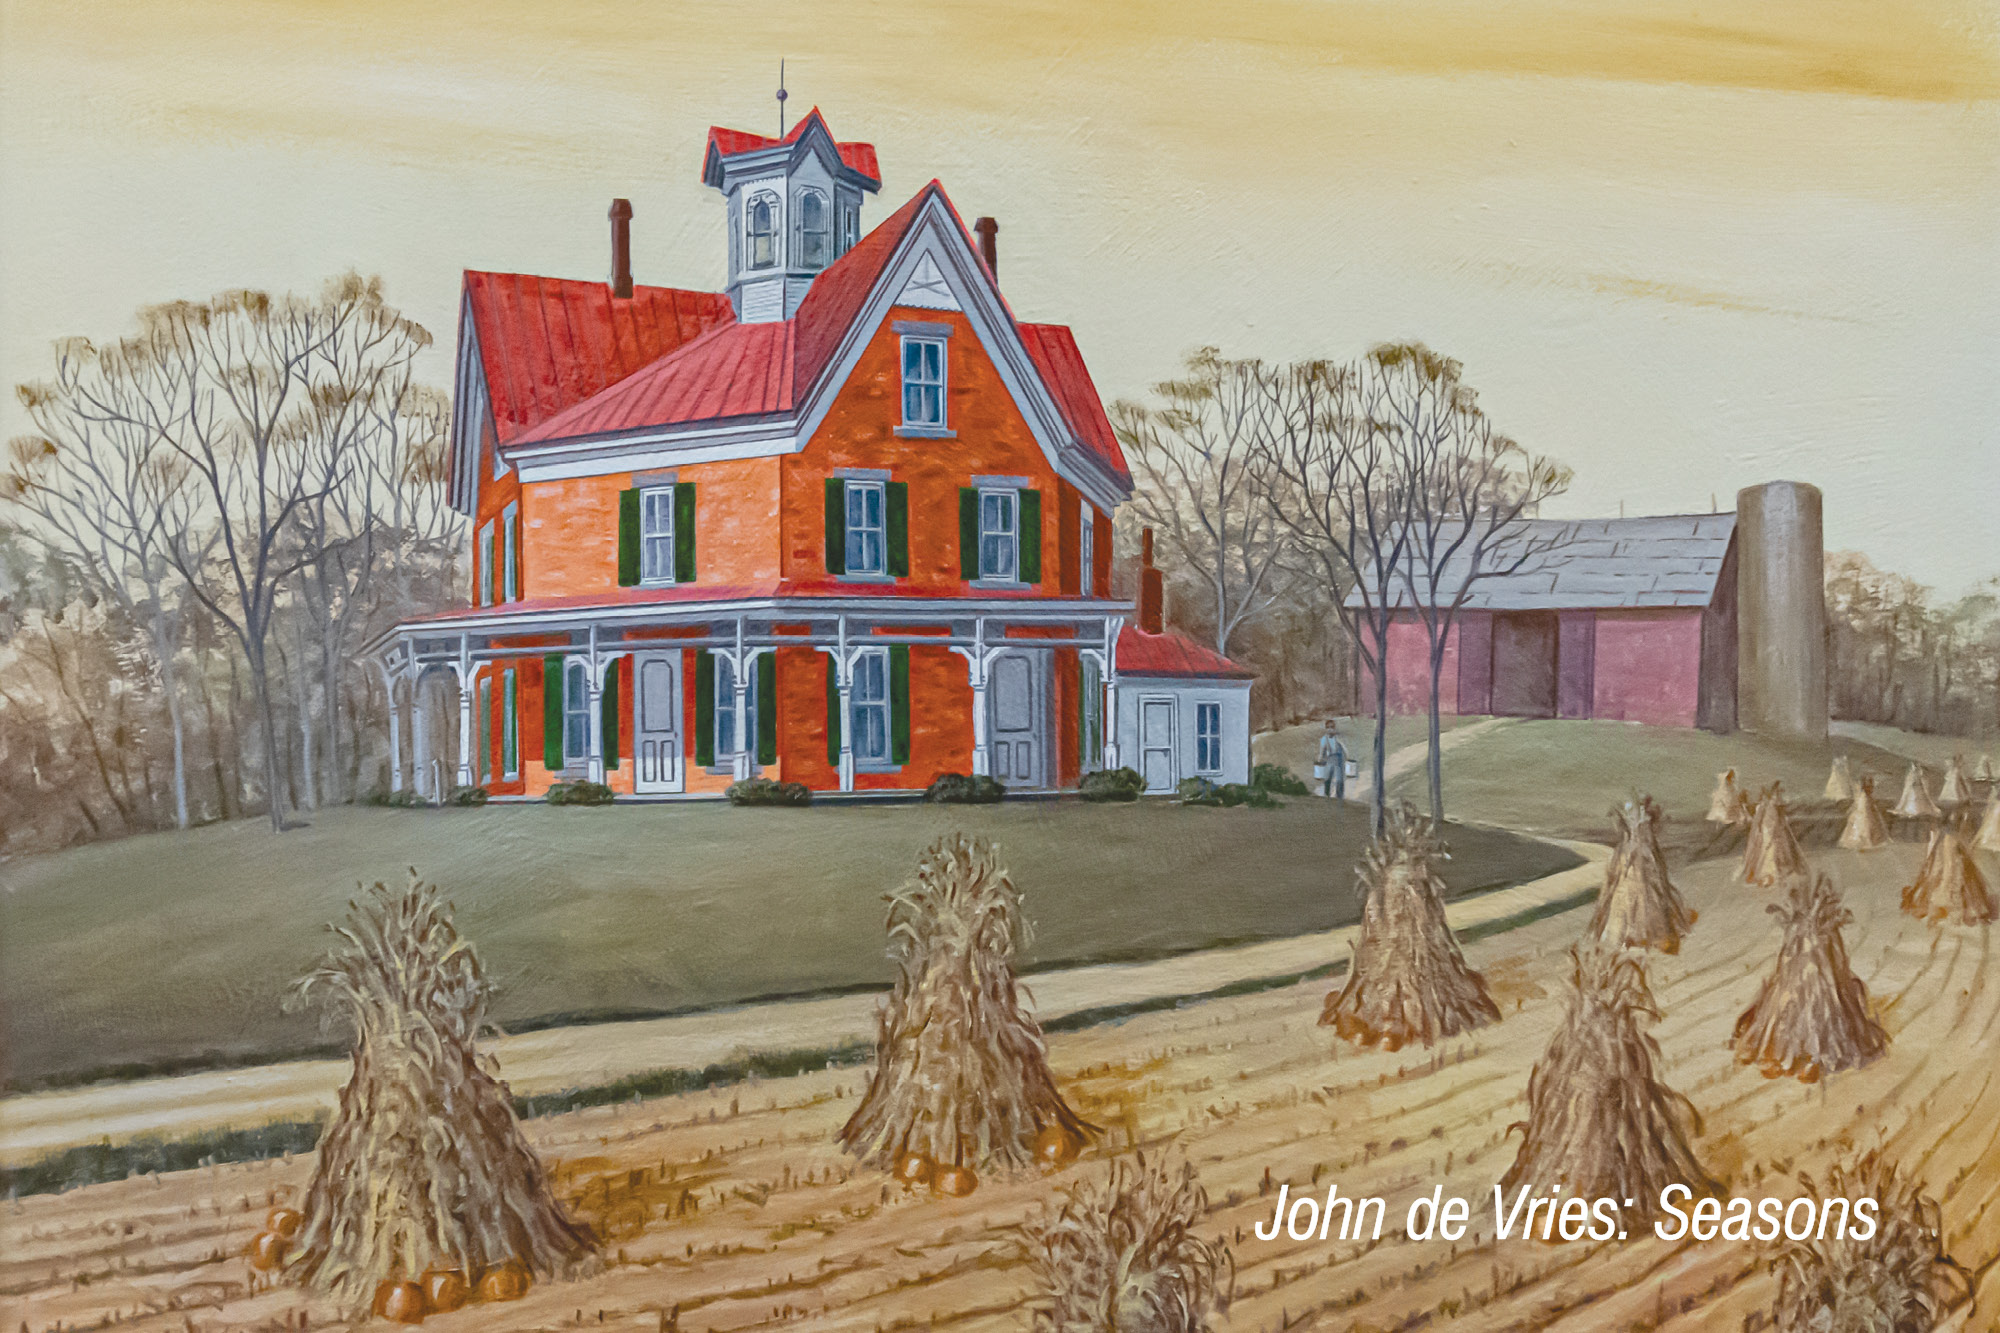 Photo of a painting of a house in rural America.